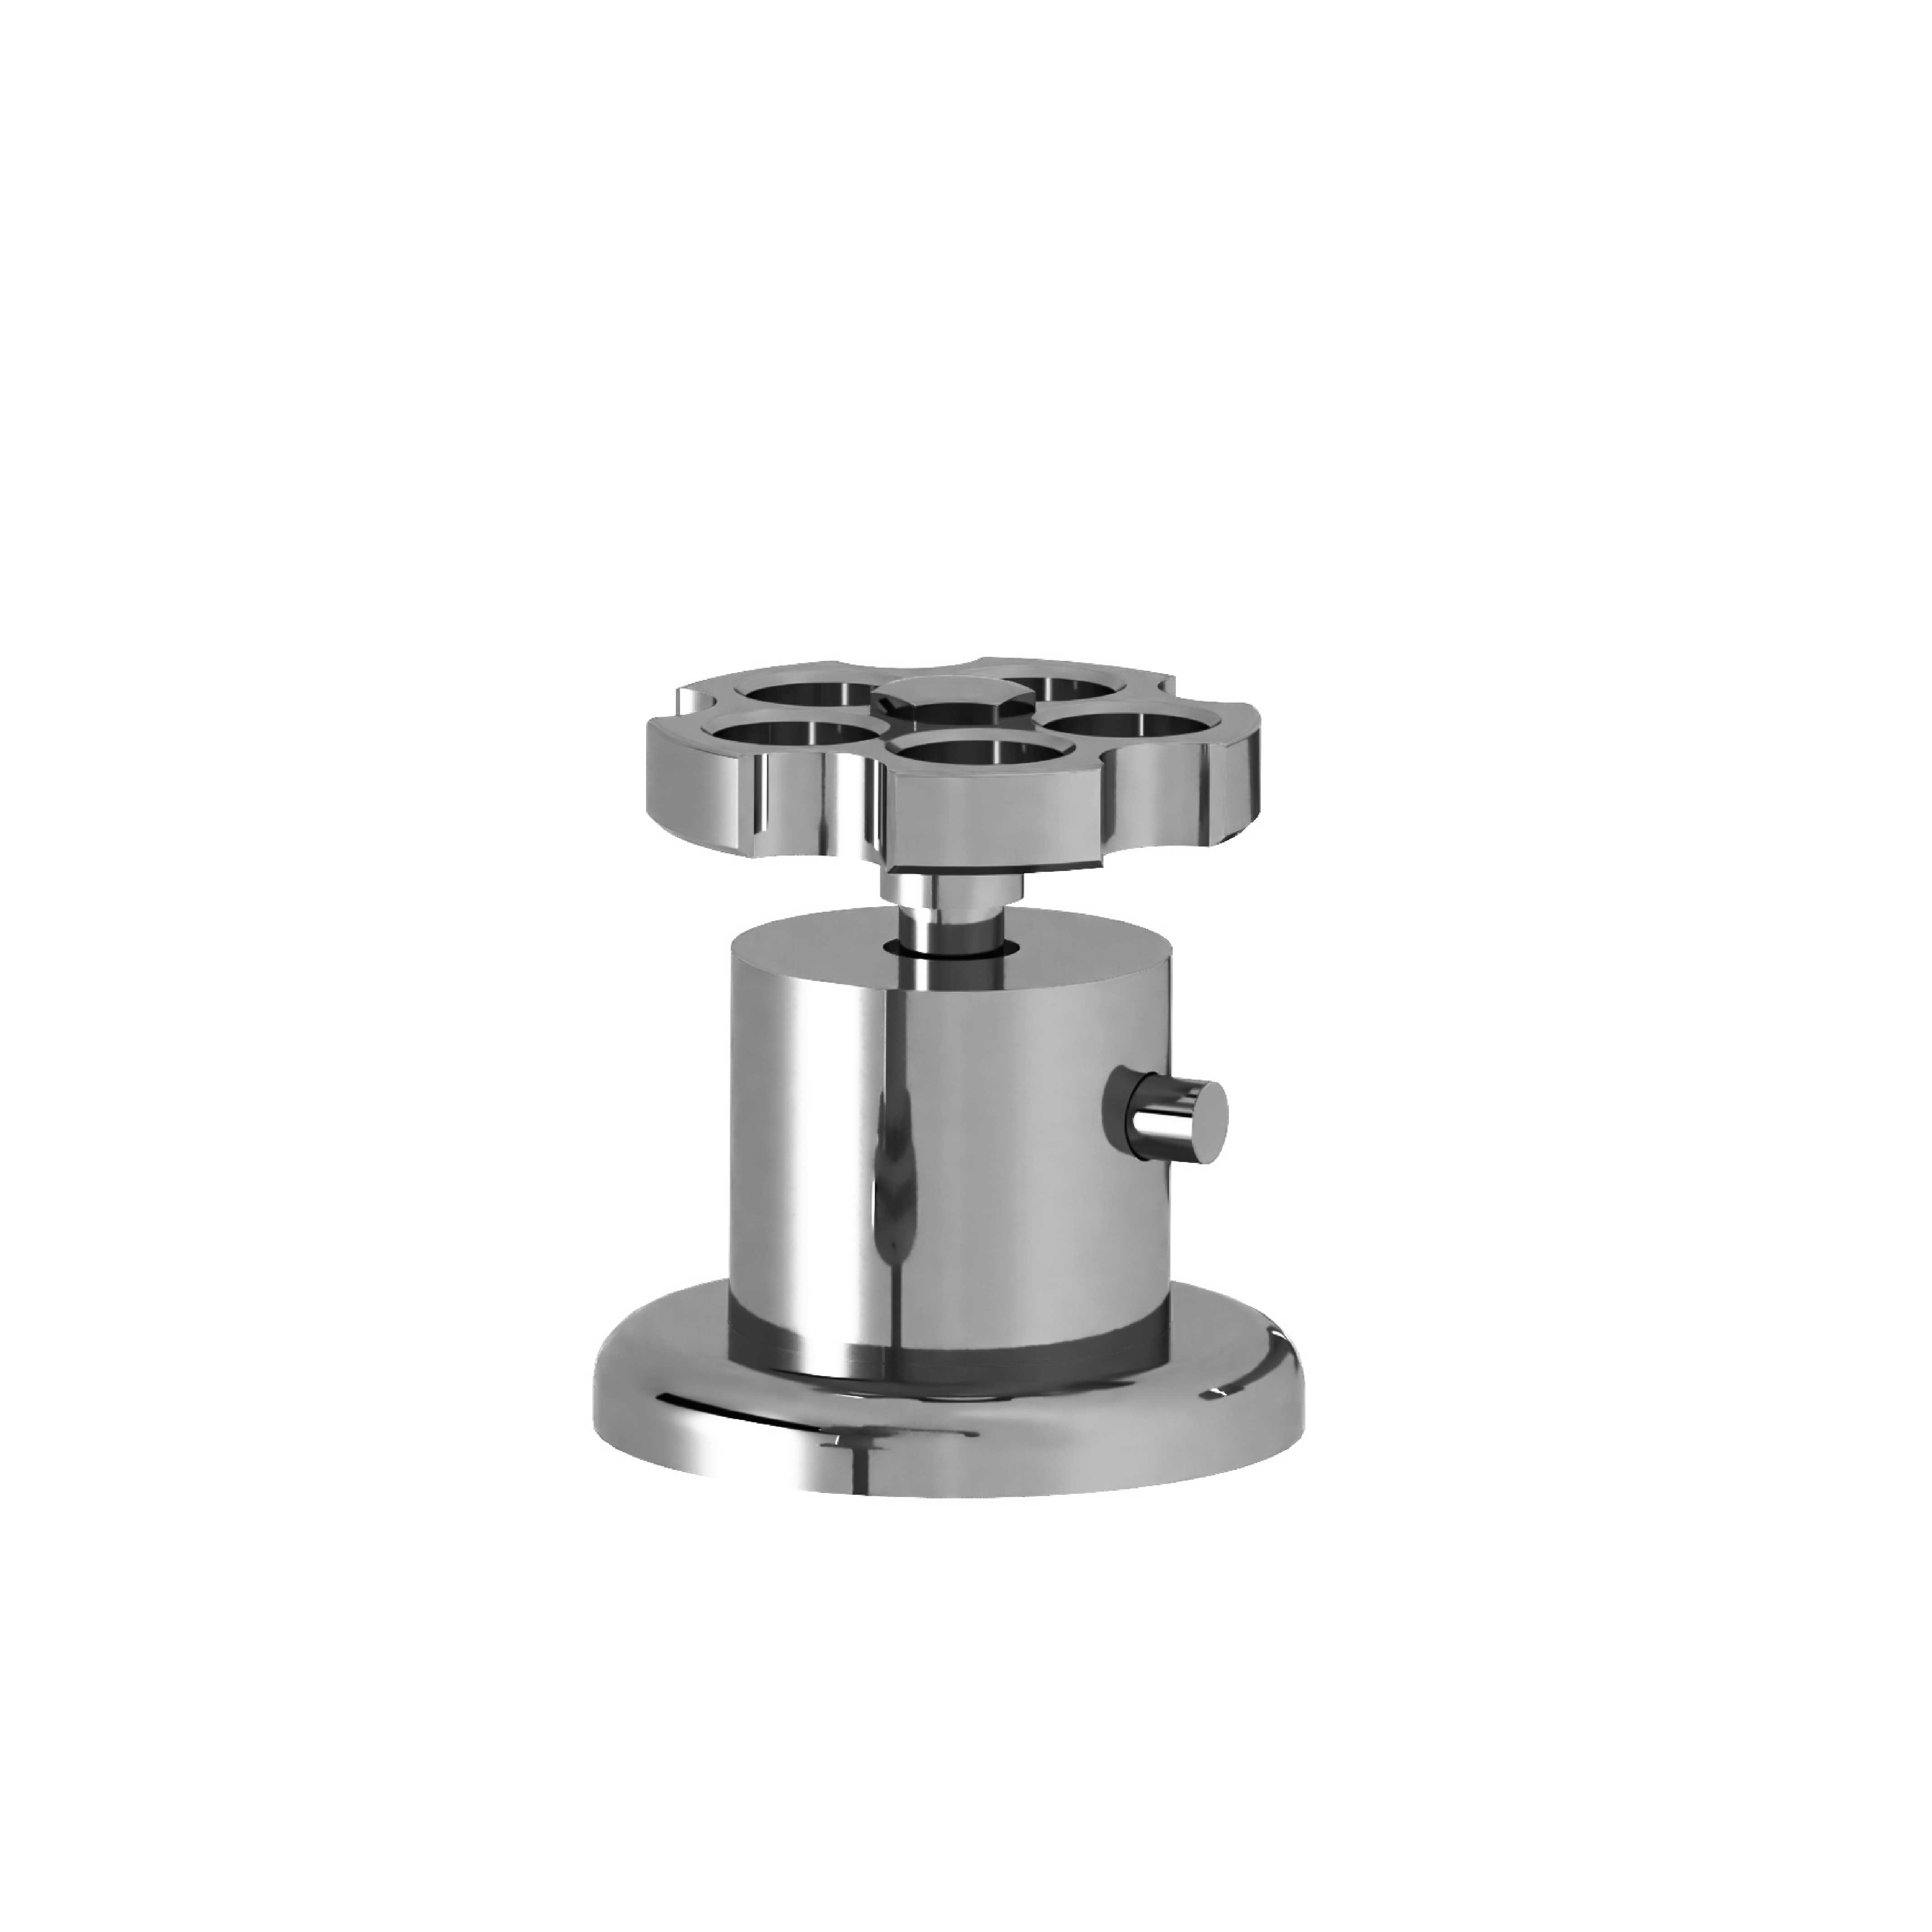 M81-330T Rim mounted thermo. mixer